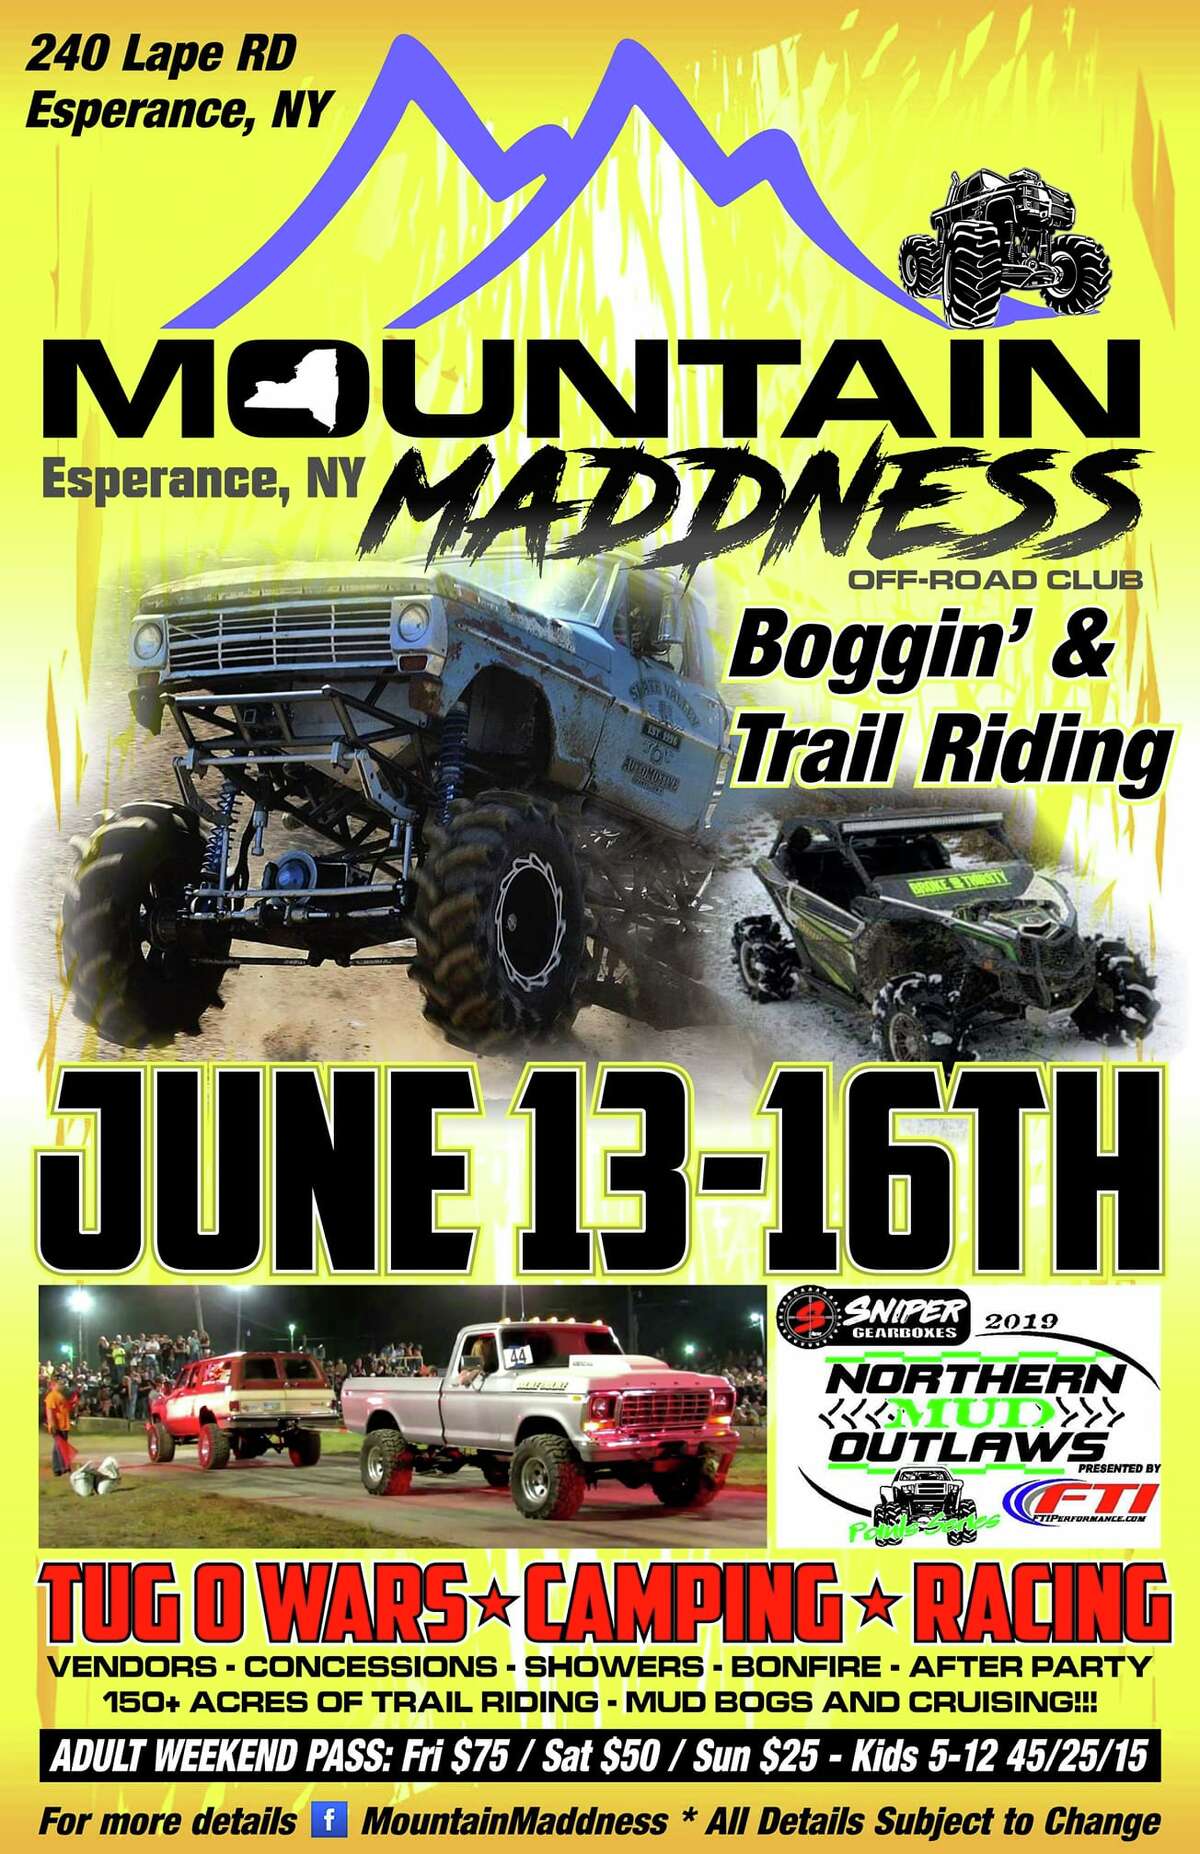 The poster for Mountain Maddness event in Esperence, Schoharie County.